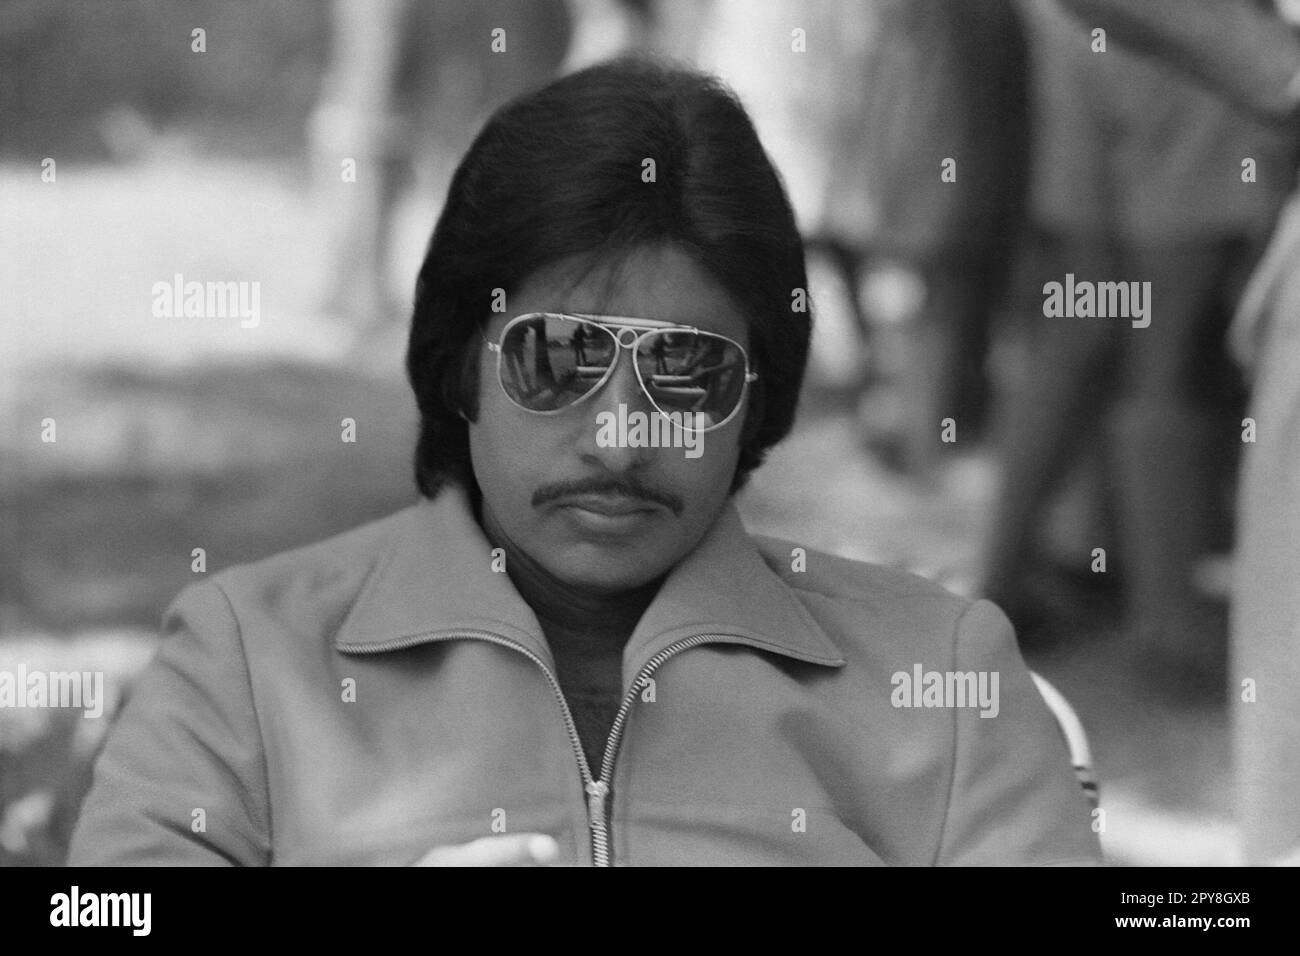 Indian old vintage 1980s black and white bollywood cinema hindi movie film actor, India, Amitabh Bachchan, Indian actor, India Stock Photo